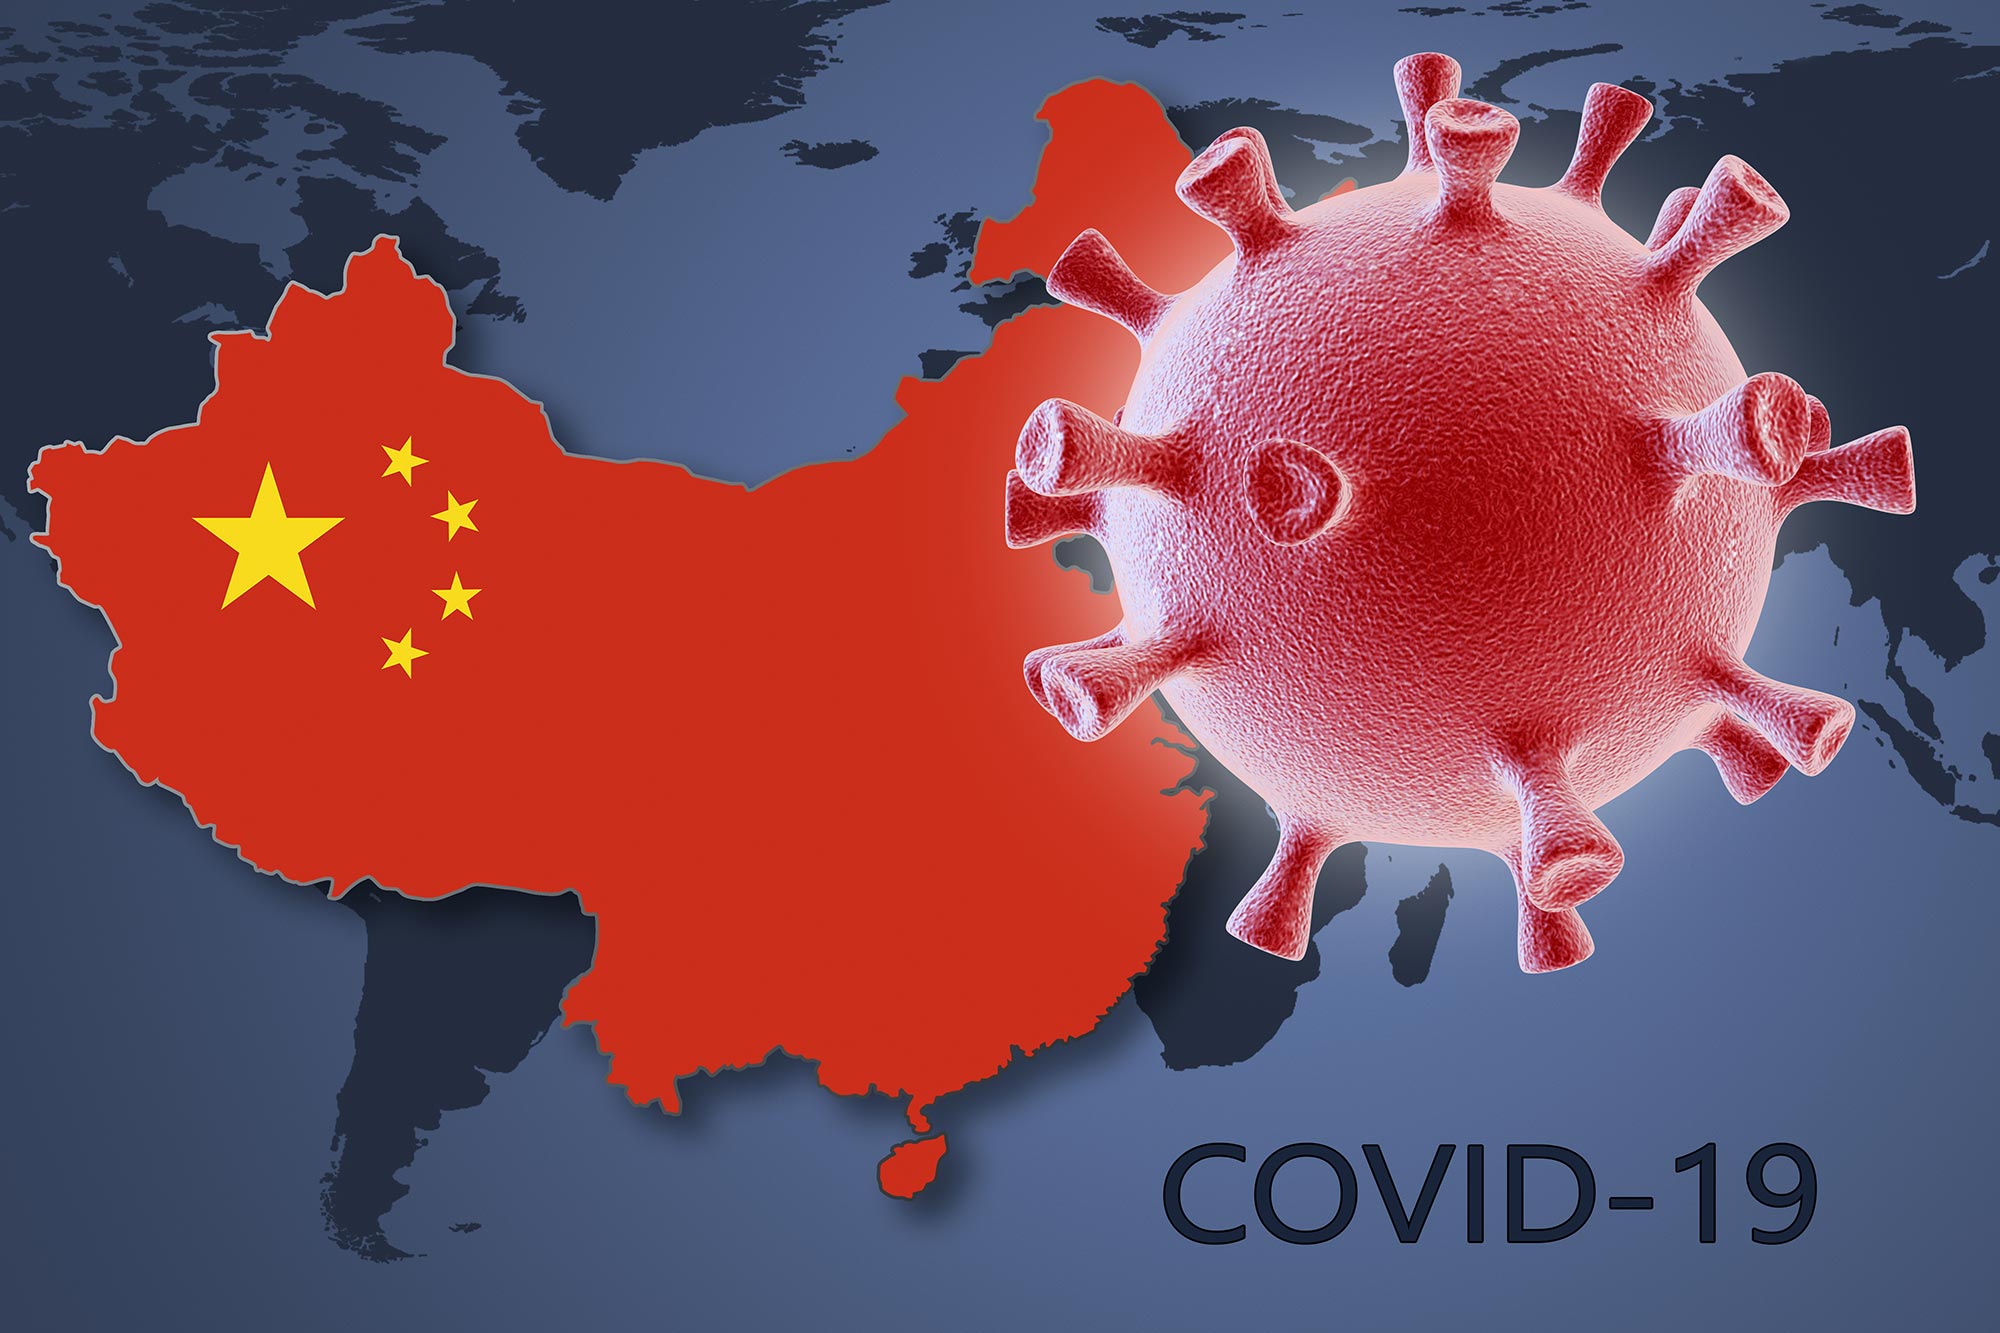 China Facing a Potentially Devastating Wave of Covid-19